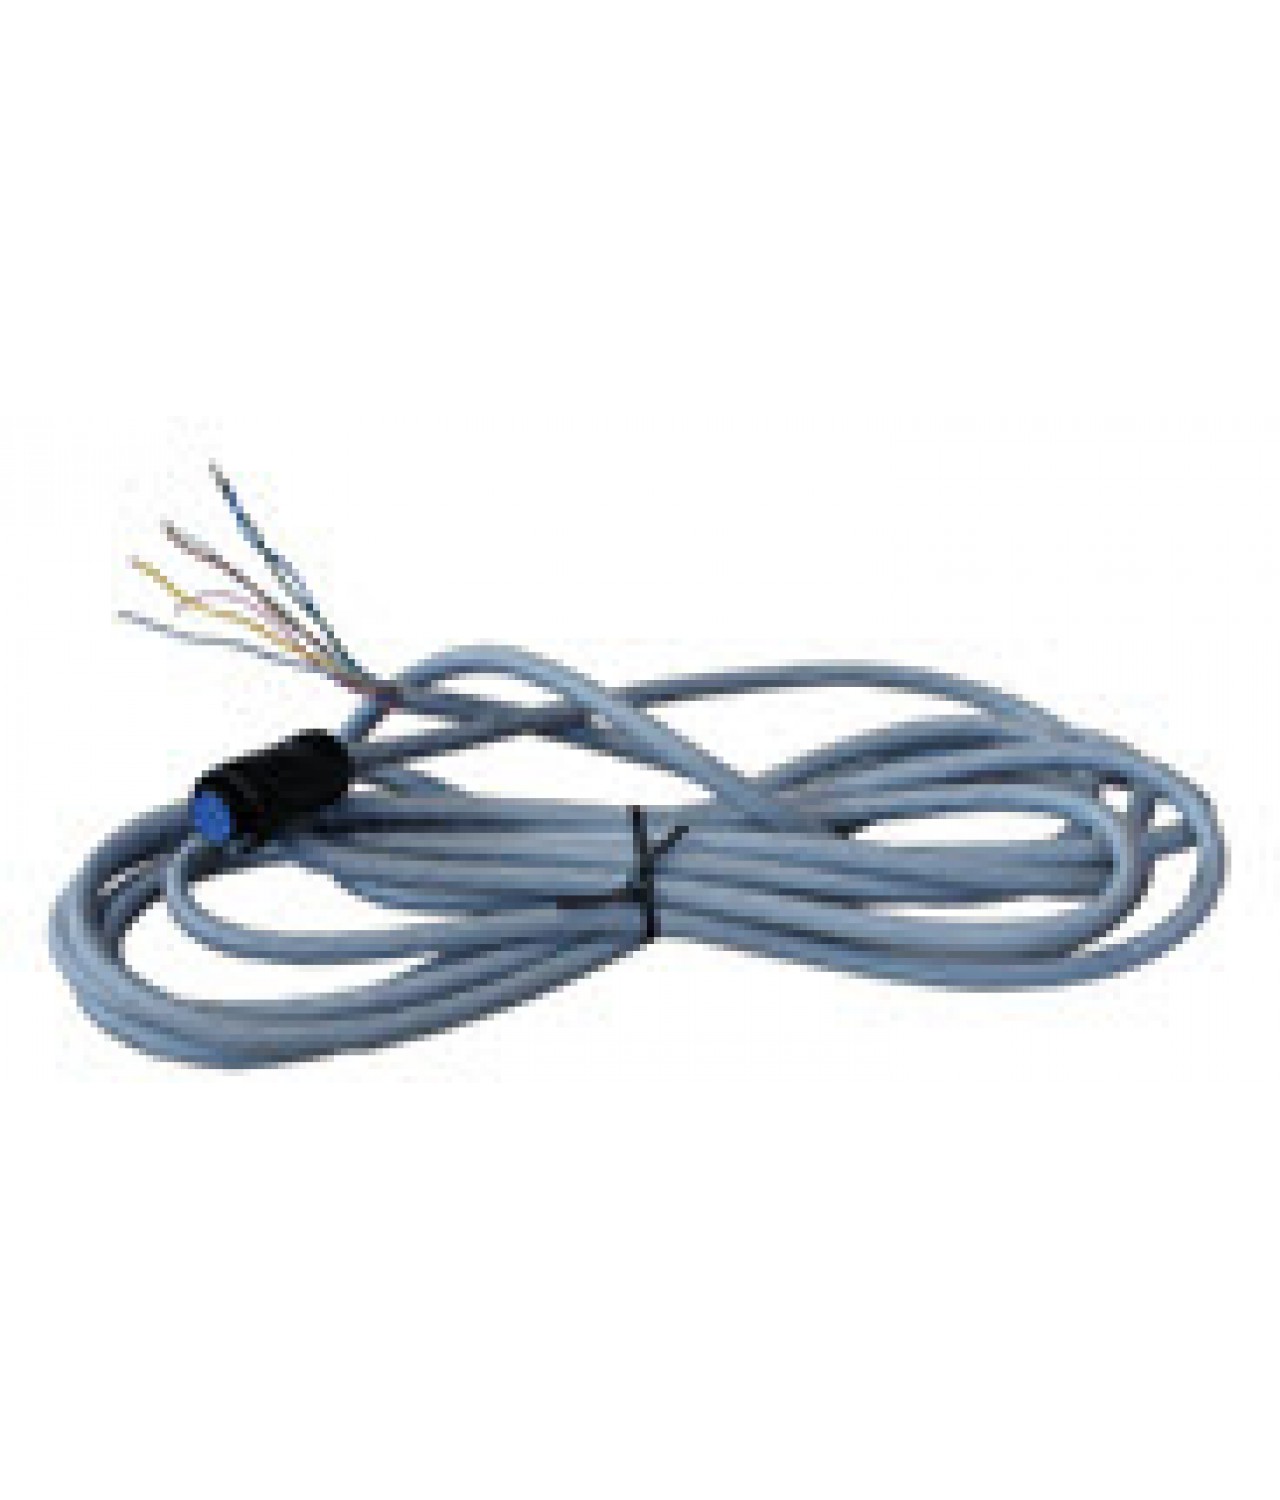 6 m network cable for connecting SUPER POLAR fans to the controllers - to be ordered separately